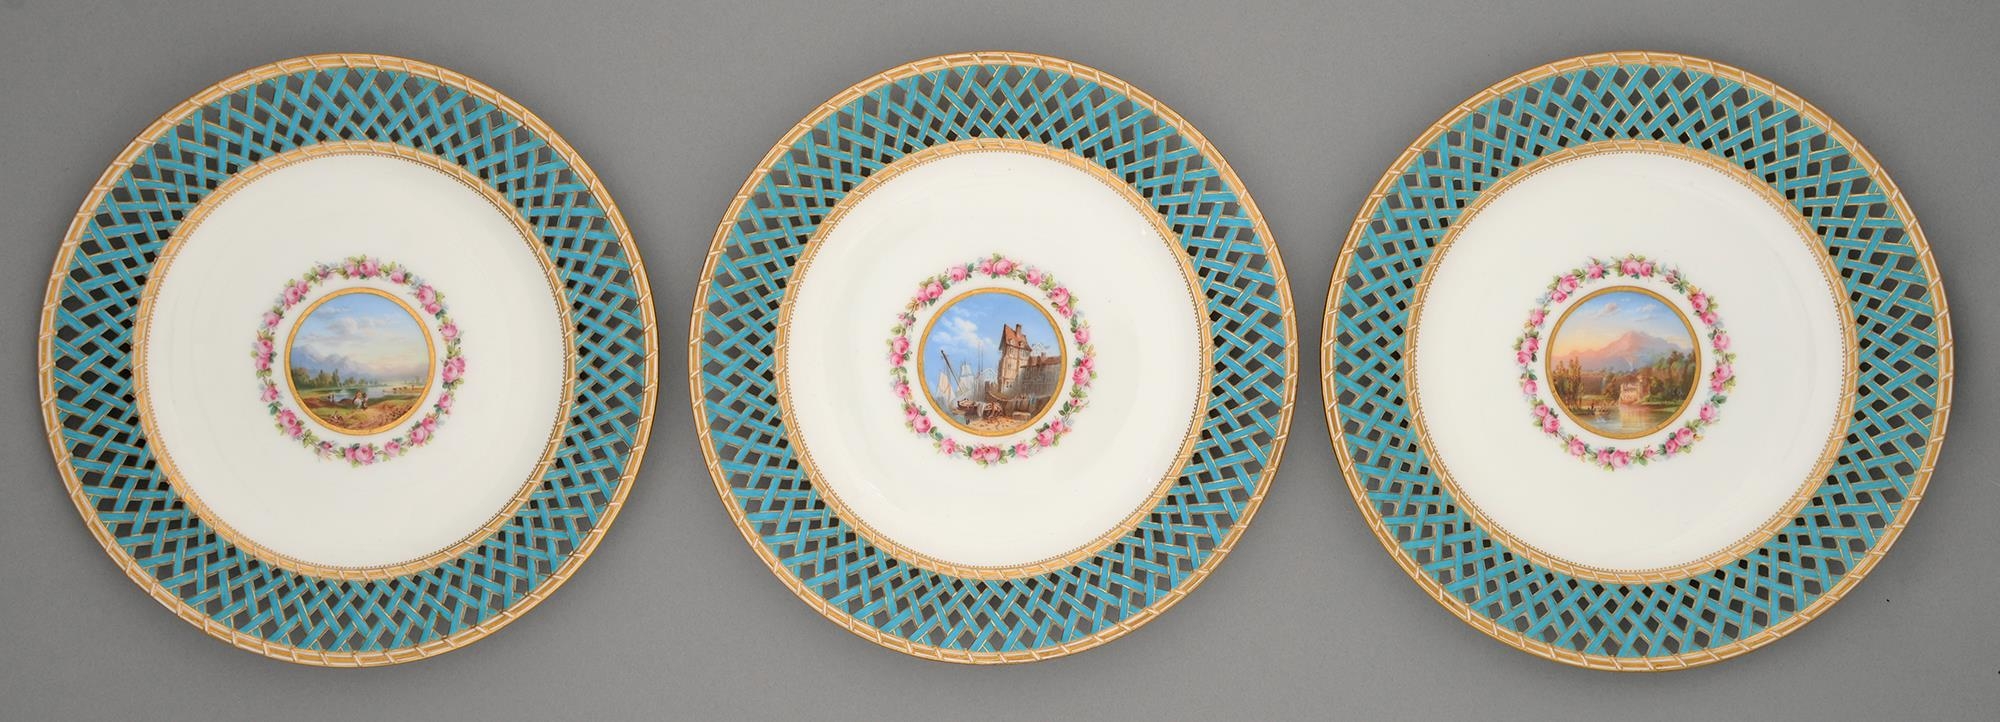 A set of three Minton plates, c1870, painted to the centre with a Continental landscape encircled by